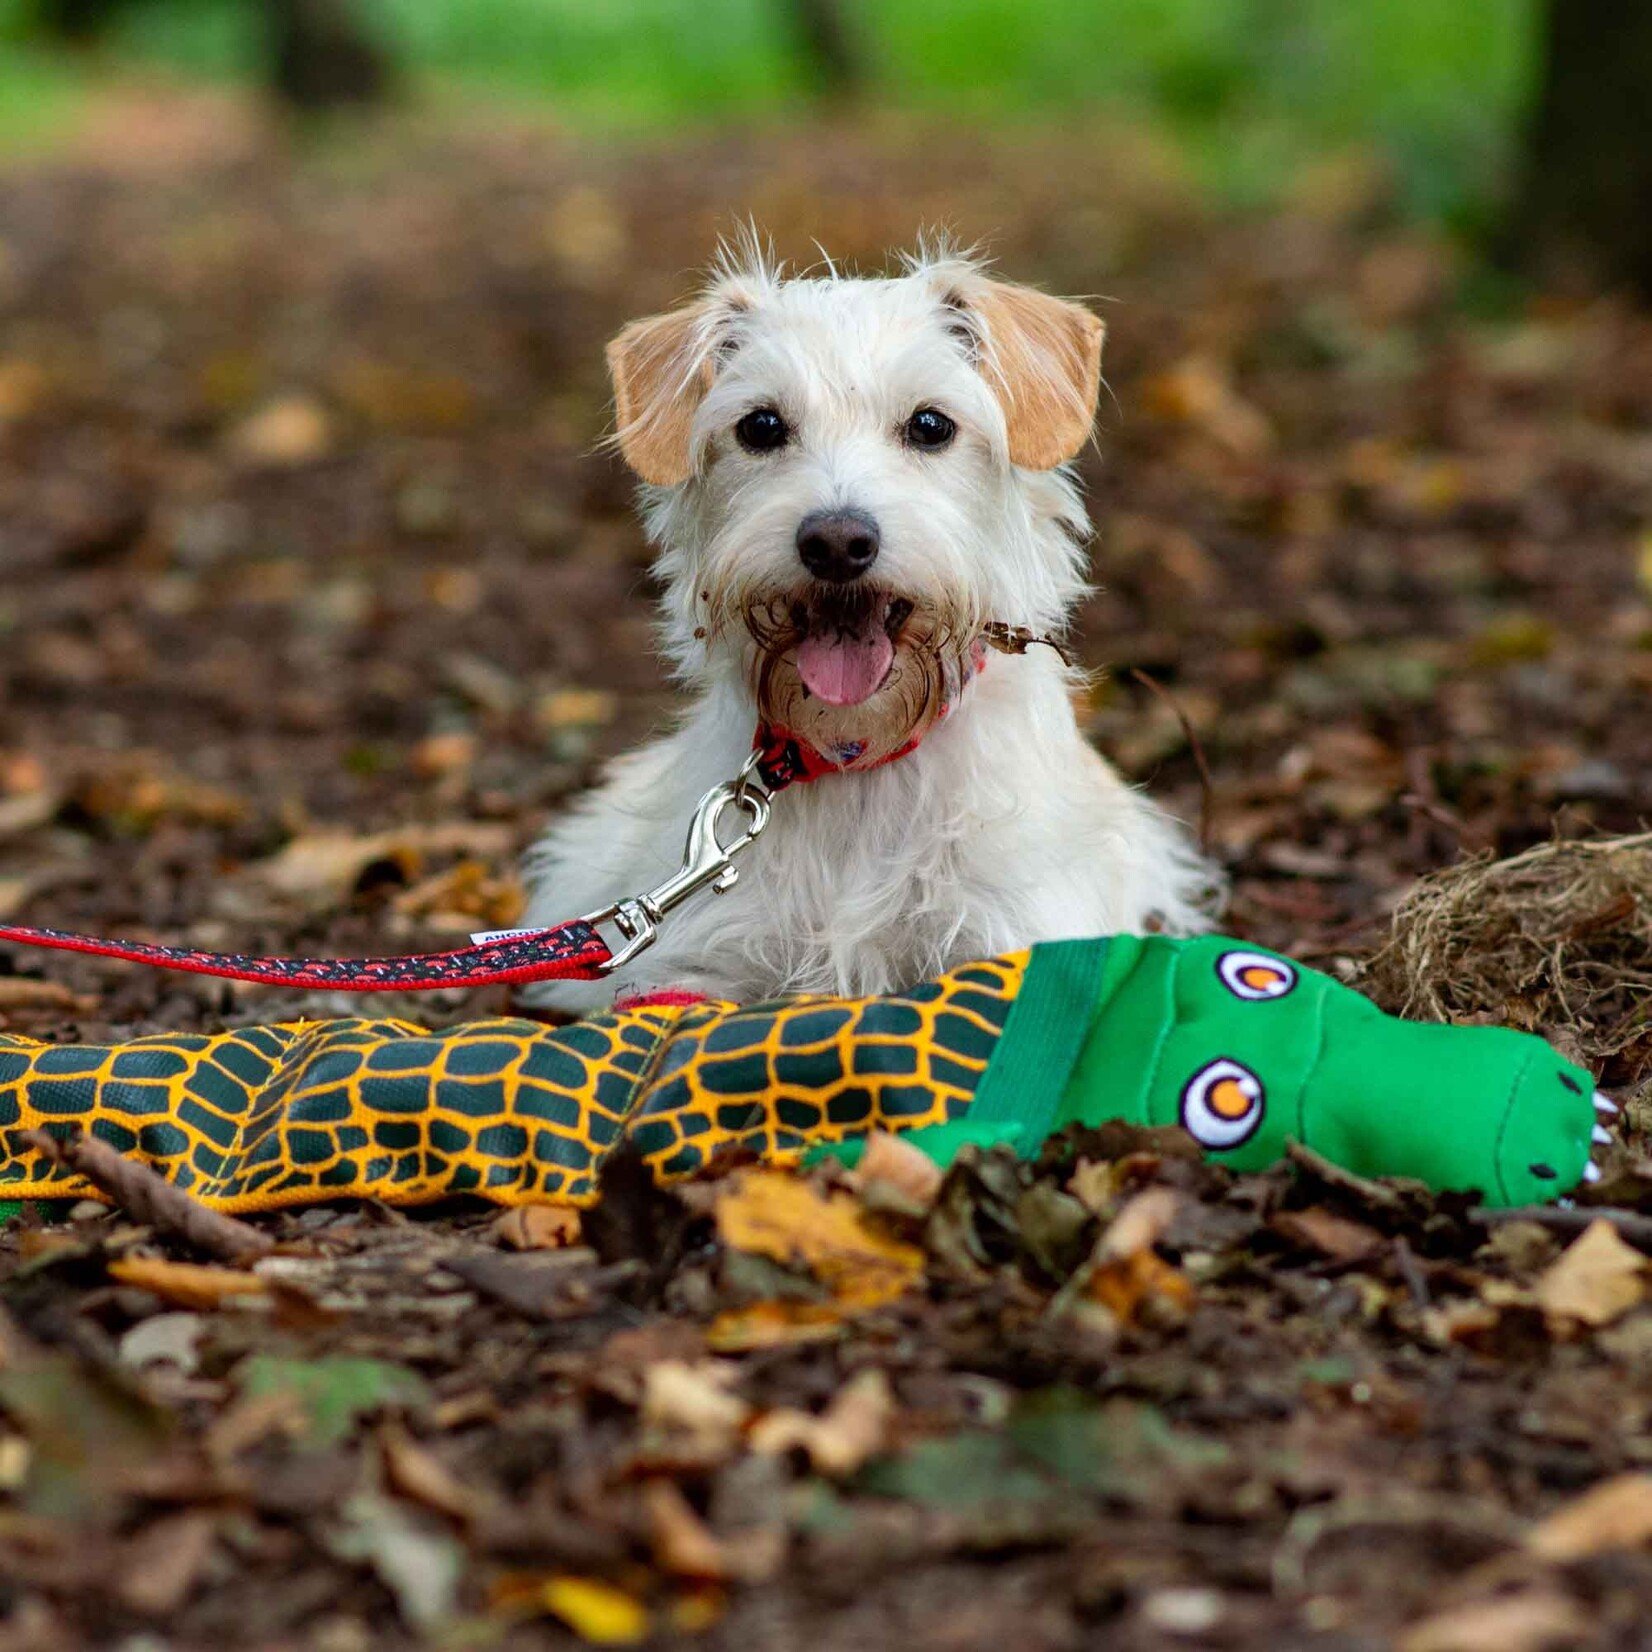 Ancol Tough Crocodile Squeaky Dog Toy with Recycled Stuffing, 70cm